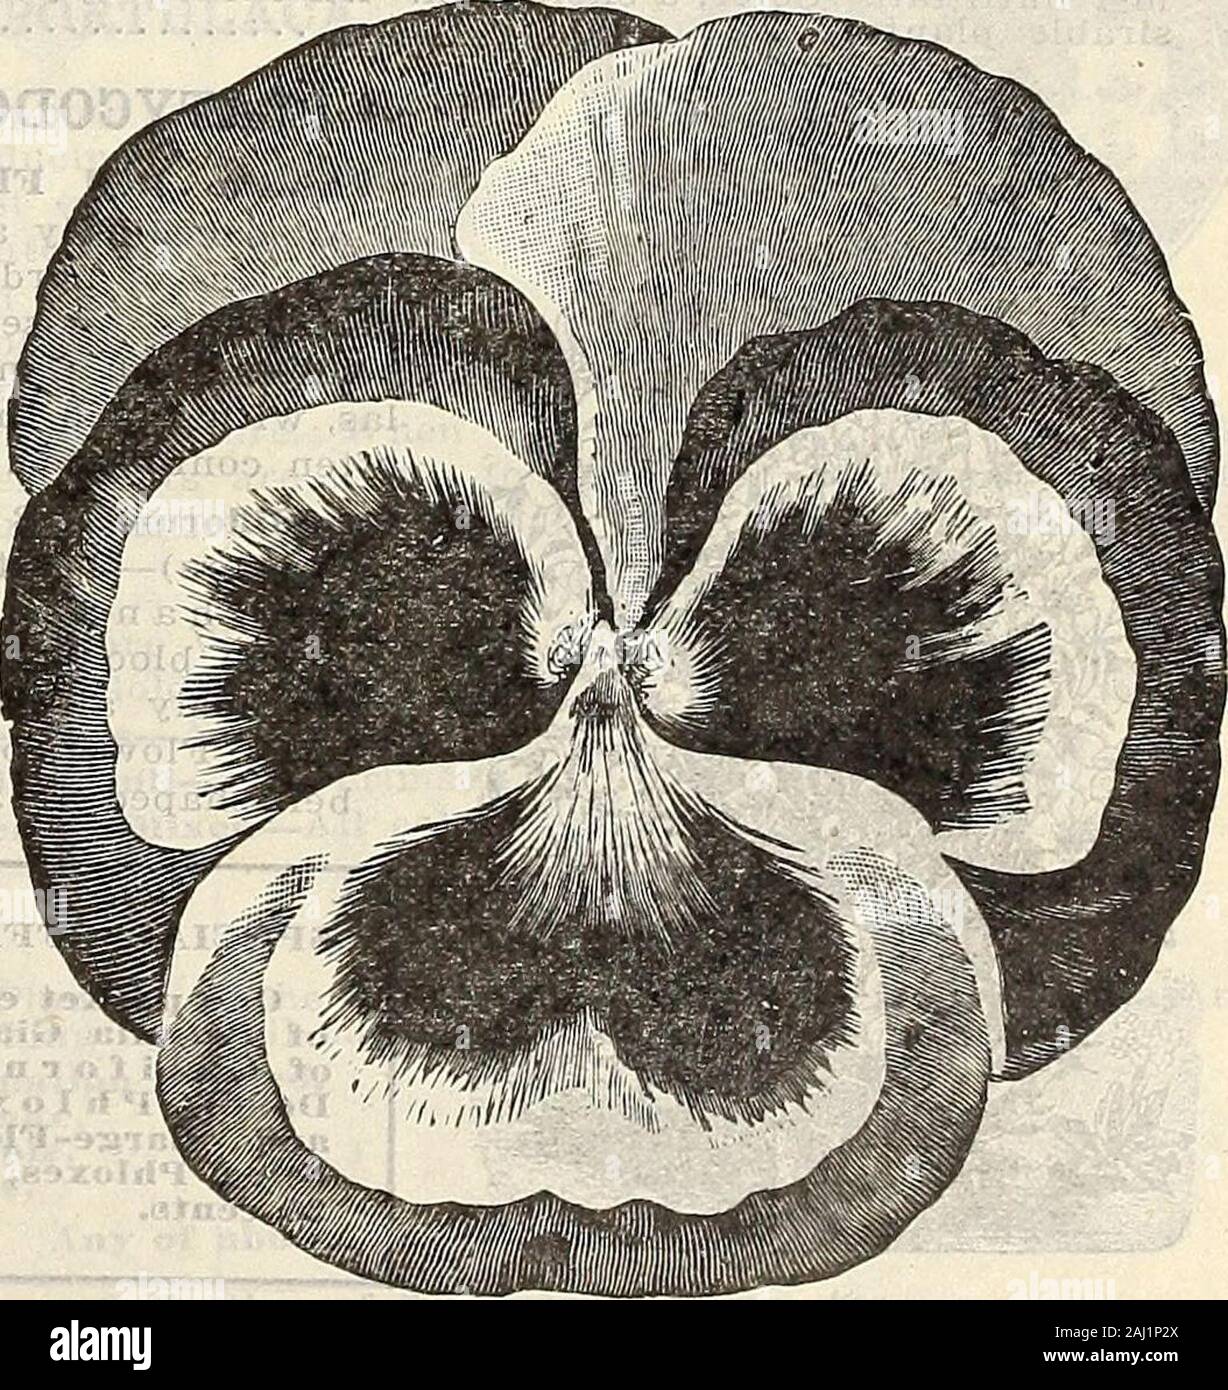 Farm and garden annual : spring 1907 . PANSY PSTCHB,. CUKRIUS I.TliU.ATI&lt;nAL BUXTUBB PANSIES, 76 CURRIE BROTHERS COMPANY, MILWAUKEE, WIS. Stock Photo